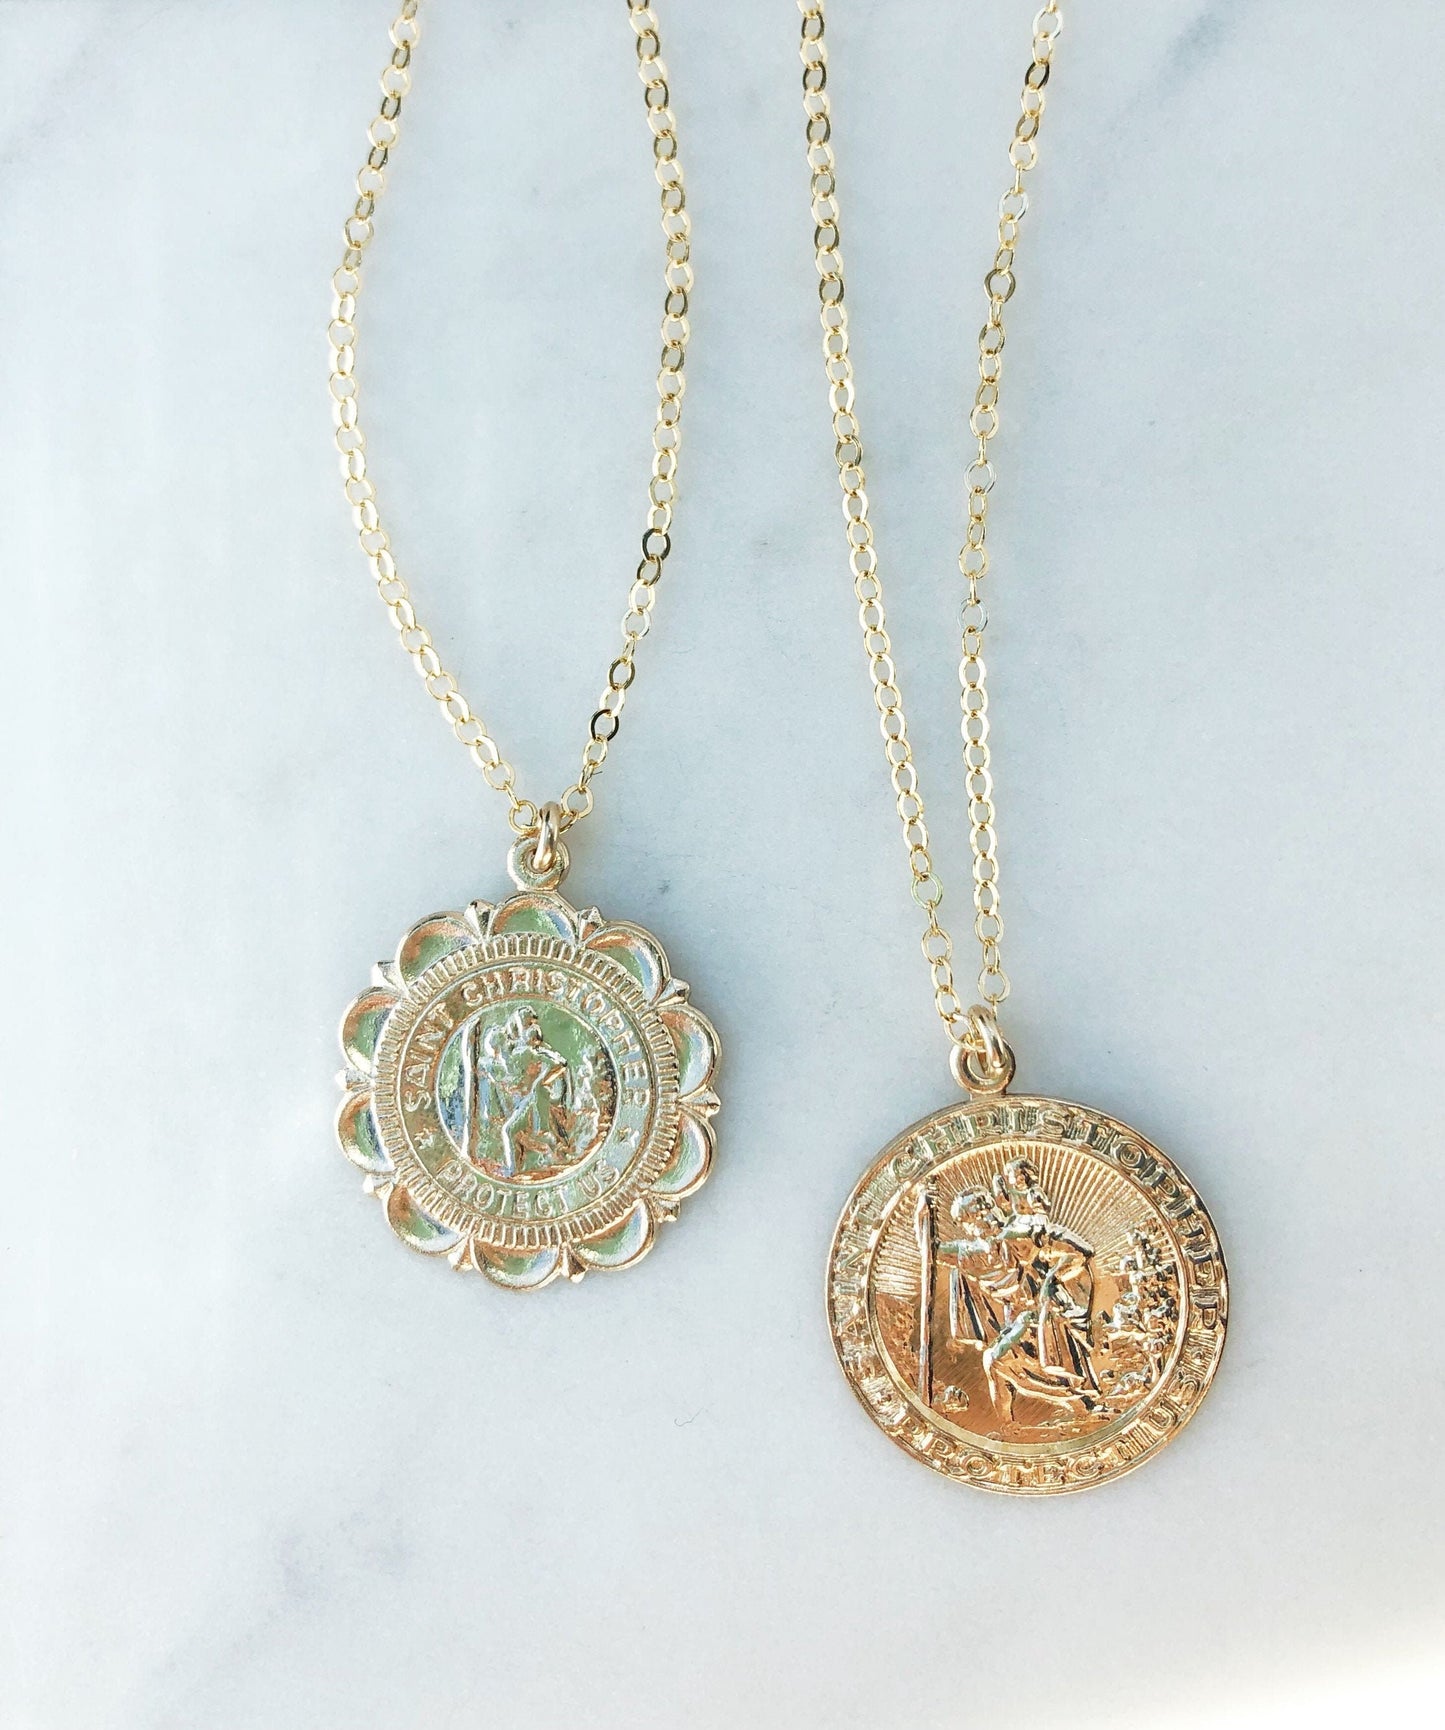 St christopher necklace, Gold filled necklace, coin necklace, dainty necklace, layering necklace, religious necklace, necklaces for women